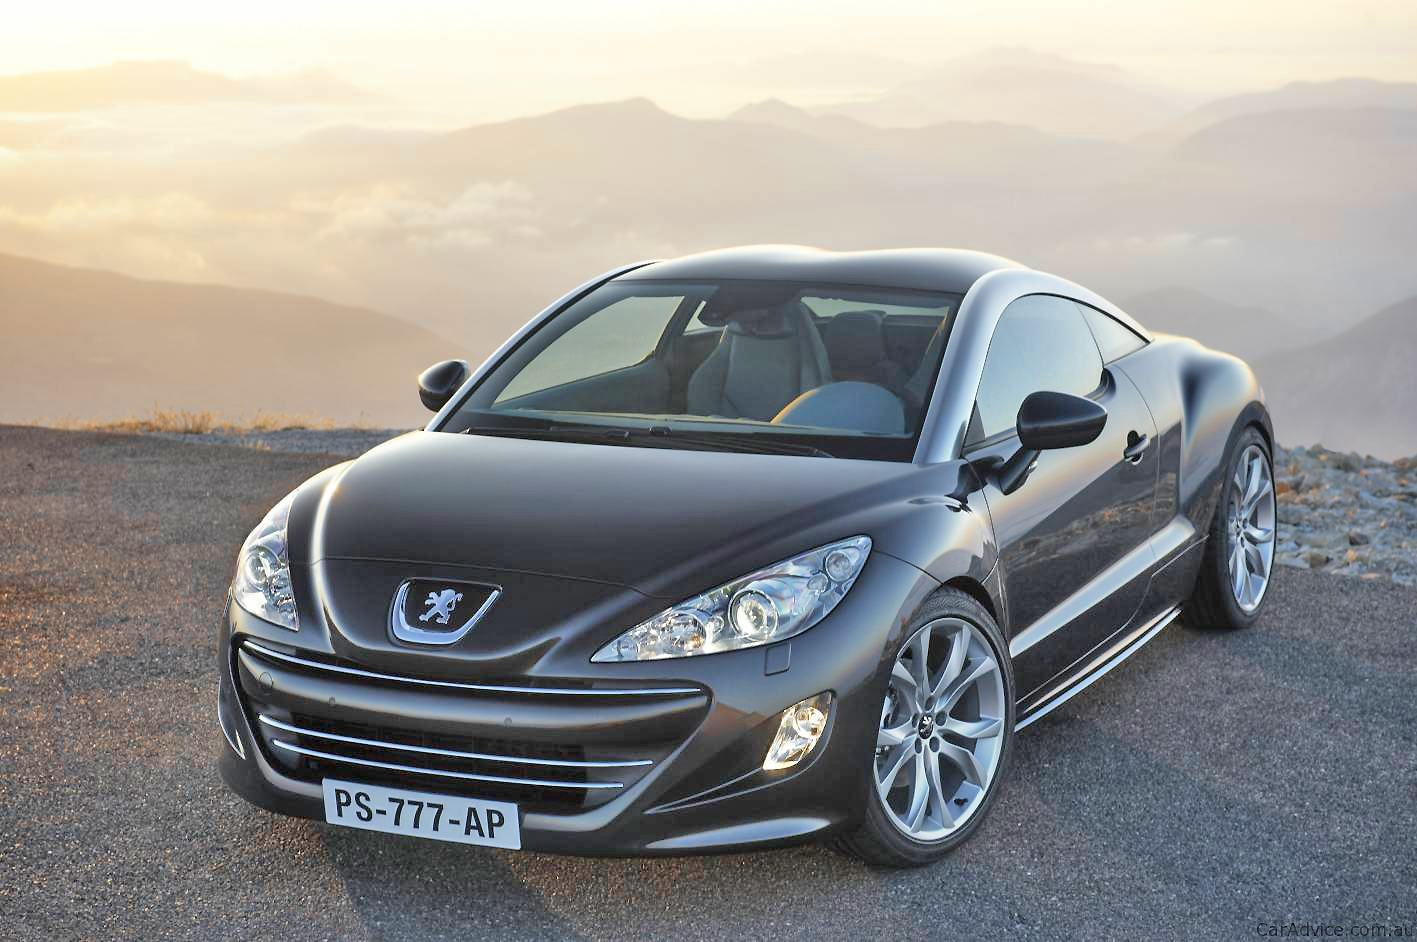 The distinctive double-bubble roof of the Peugeot RCZ is one of the features that won it the title of Most Beautiful Car of 2009.